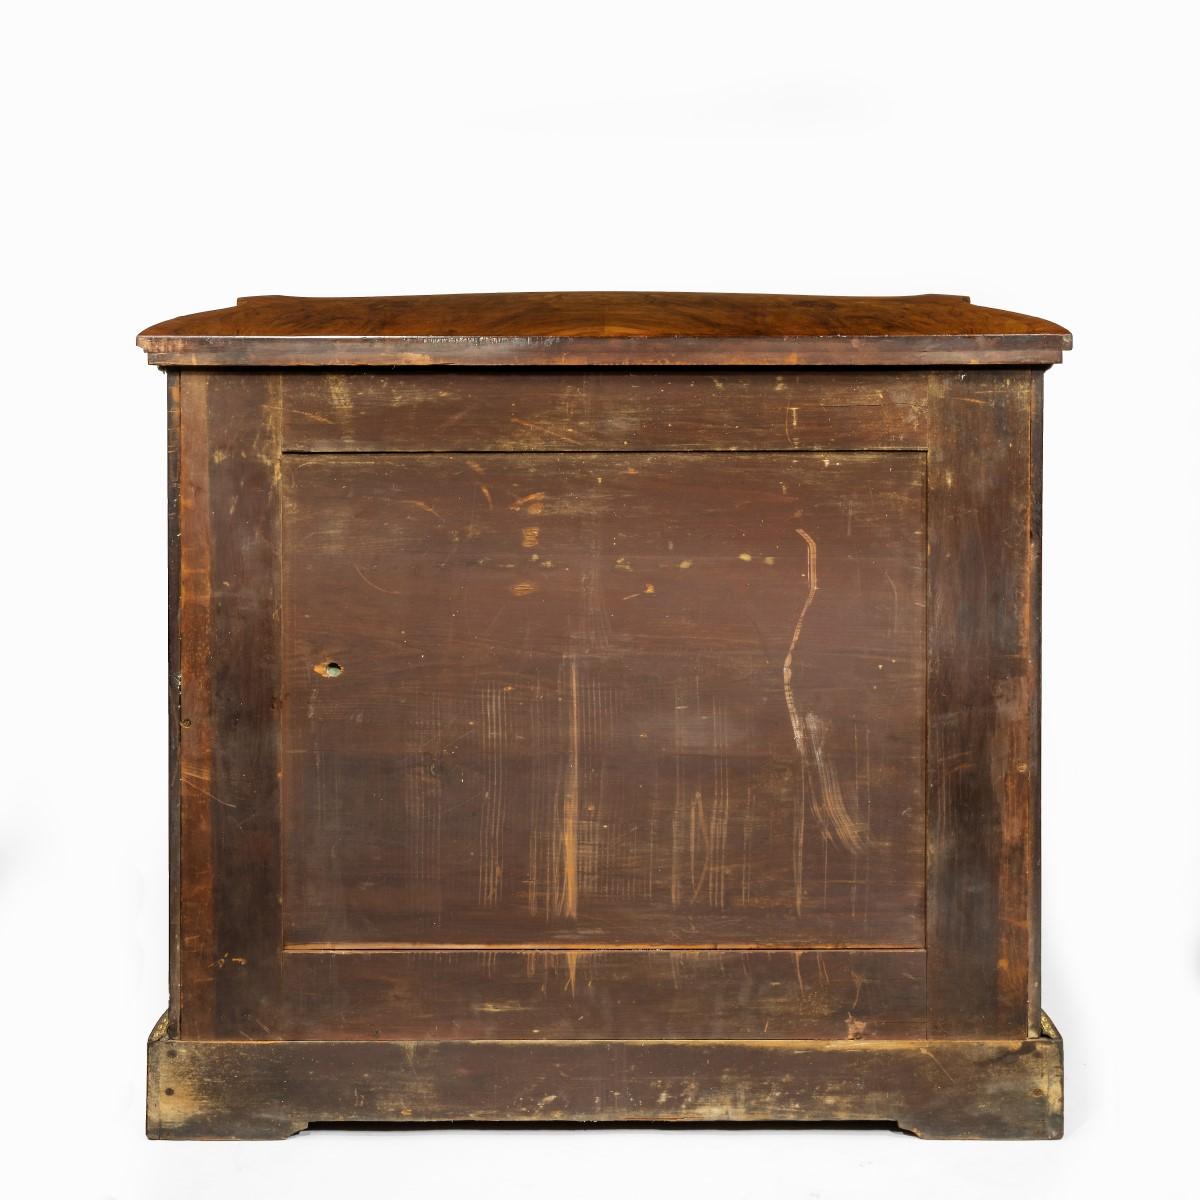 A mid-Victorian kingwood serpentine cabinet, English in the French style, the shaped top with burr-walnut half veneers within kingwood banding and boxwood stringing, the double doors with shaped panels and similar veneers, enclosing a shelf, applied